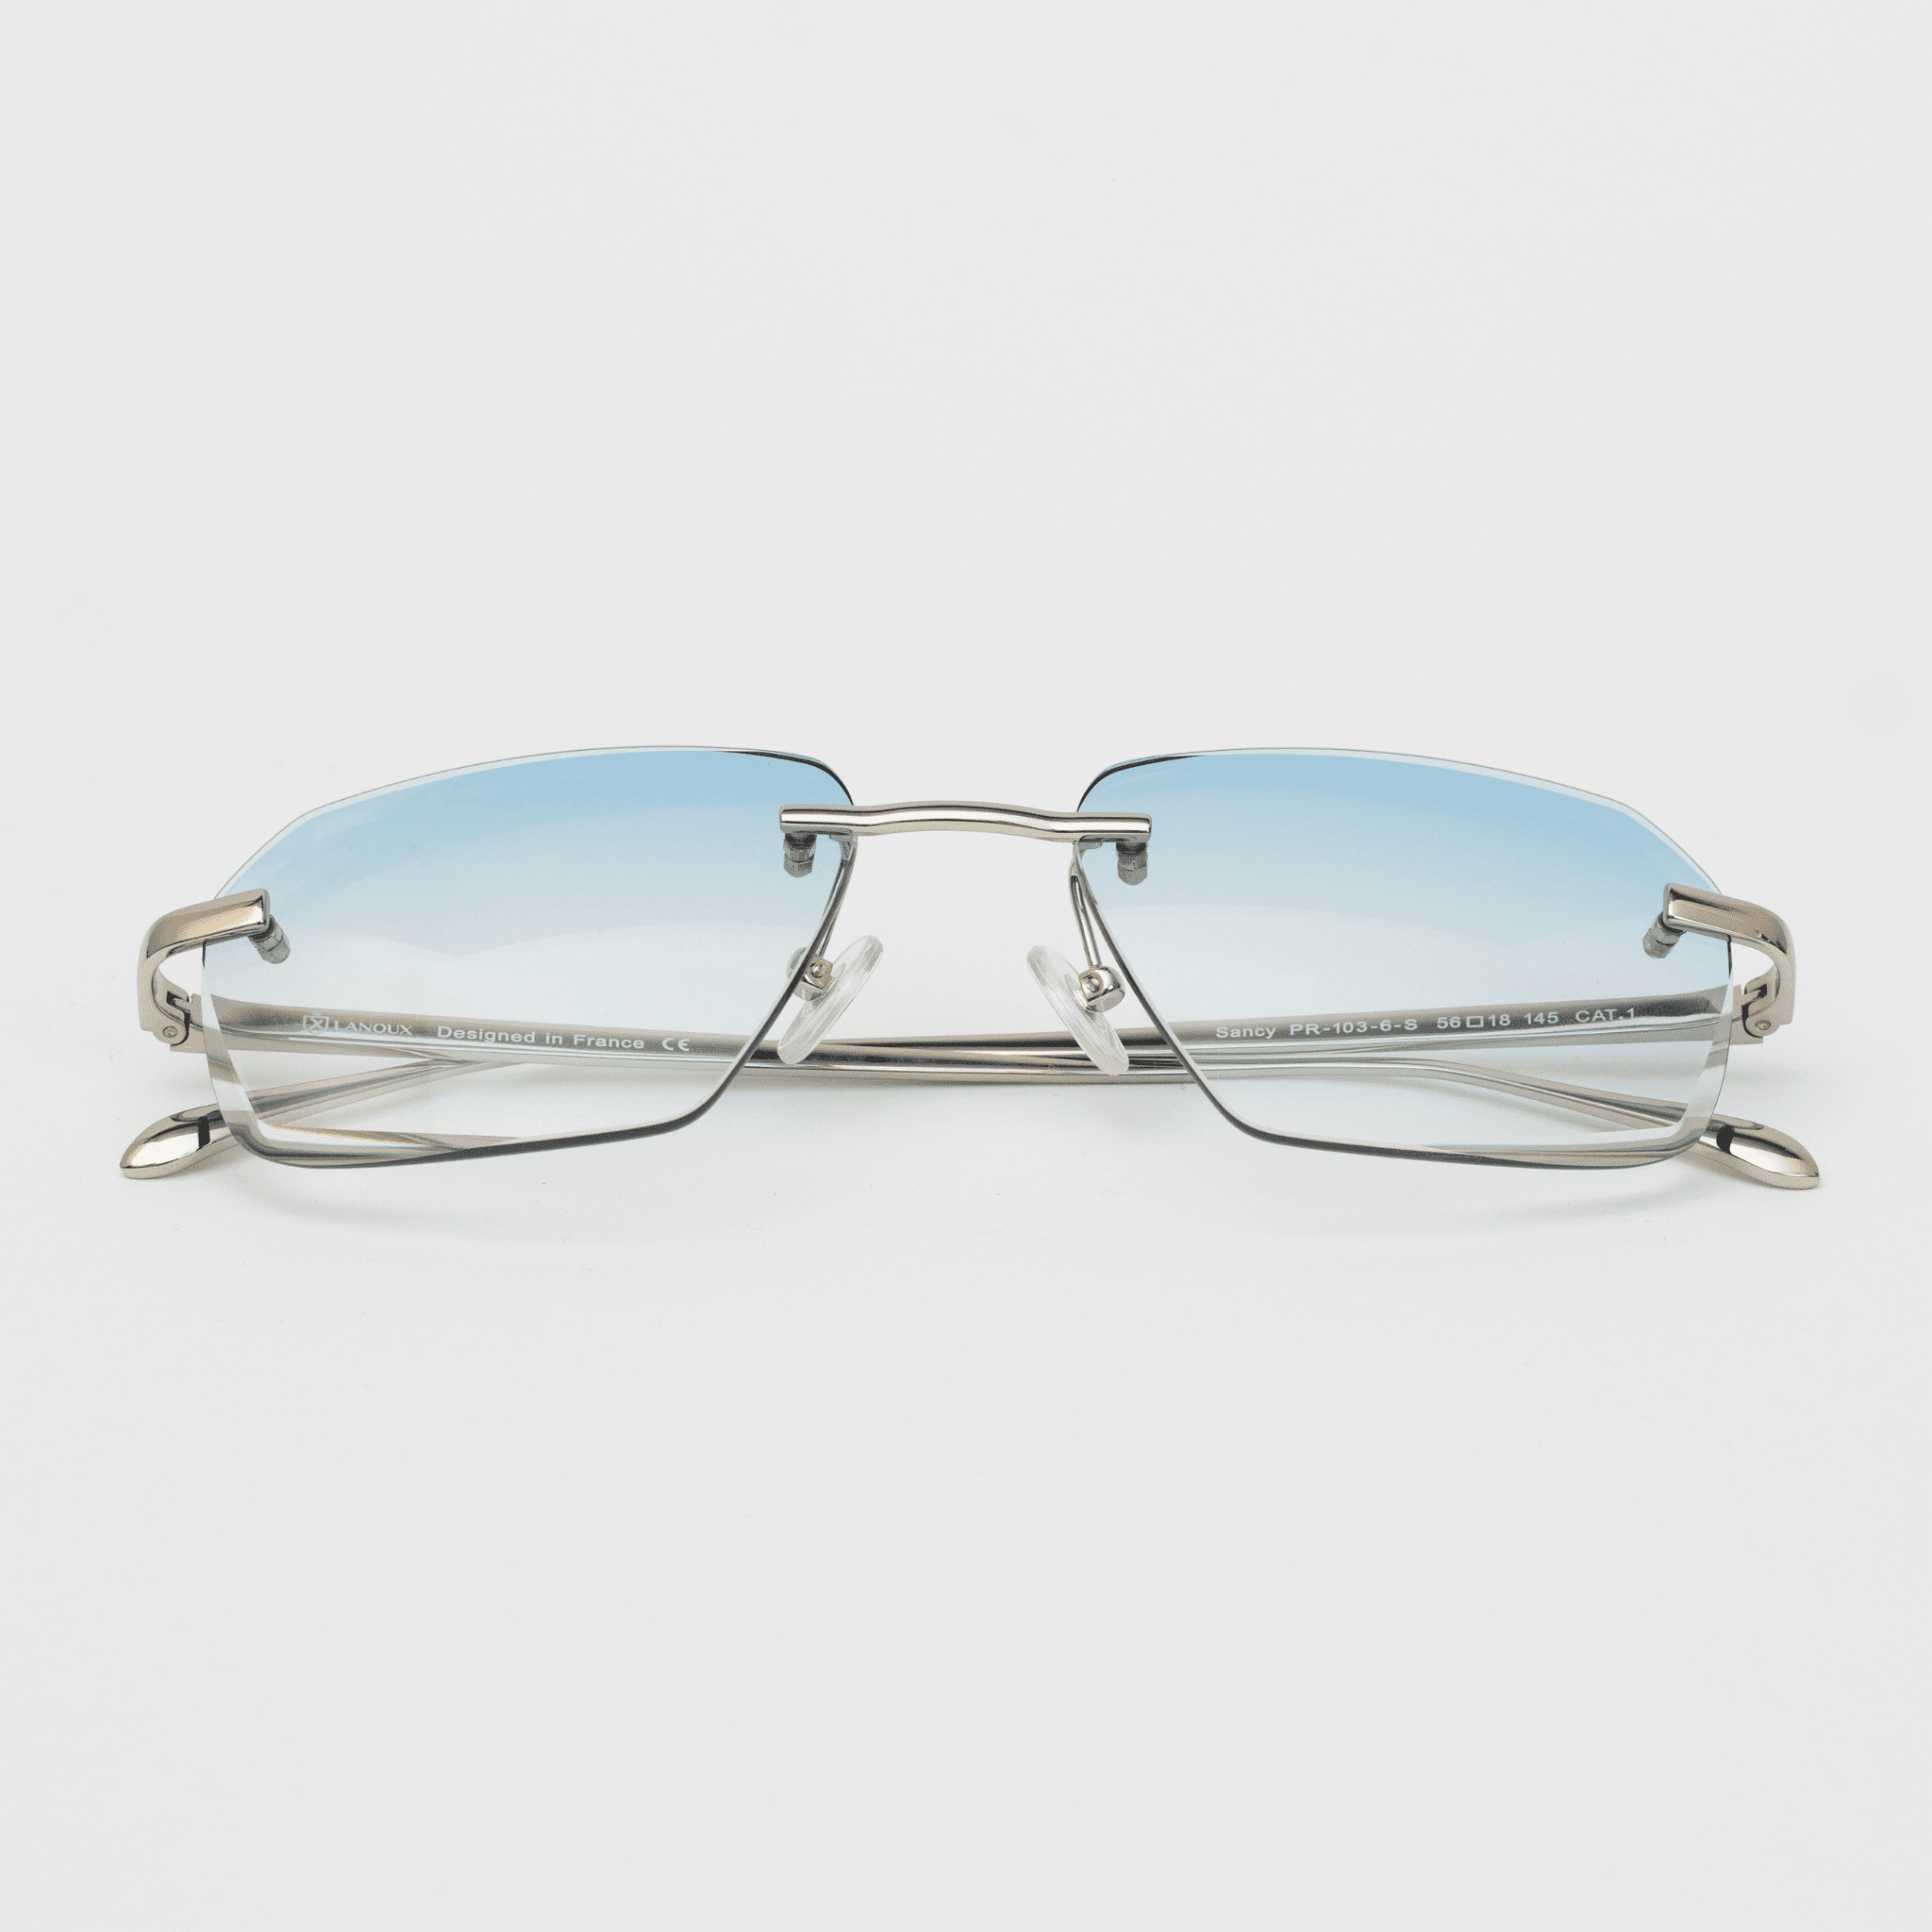 Front view of the Sancy model sunglasses featuring sky blue diamond-cut rimless lenses with sophisticated sterling silver frames, creating a fresh and airy aesthetic against a white background.